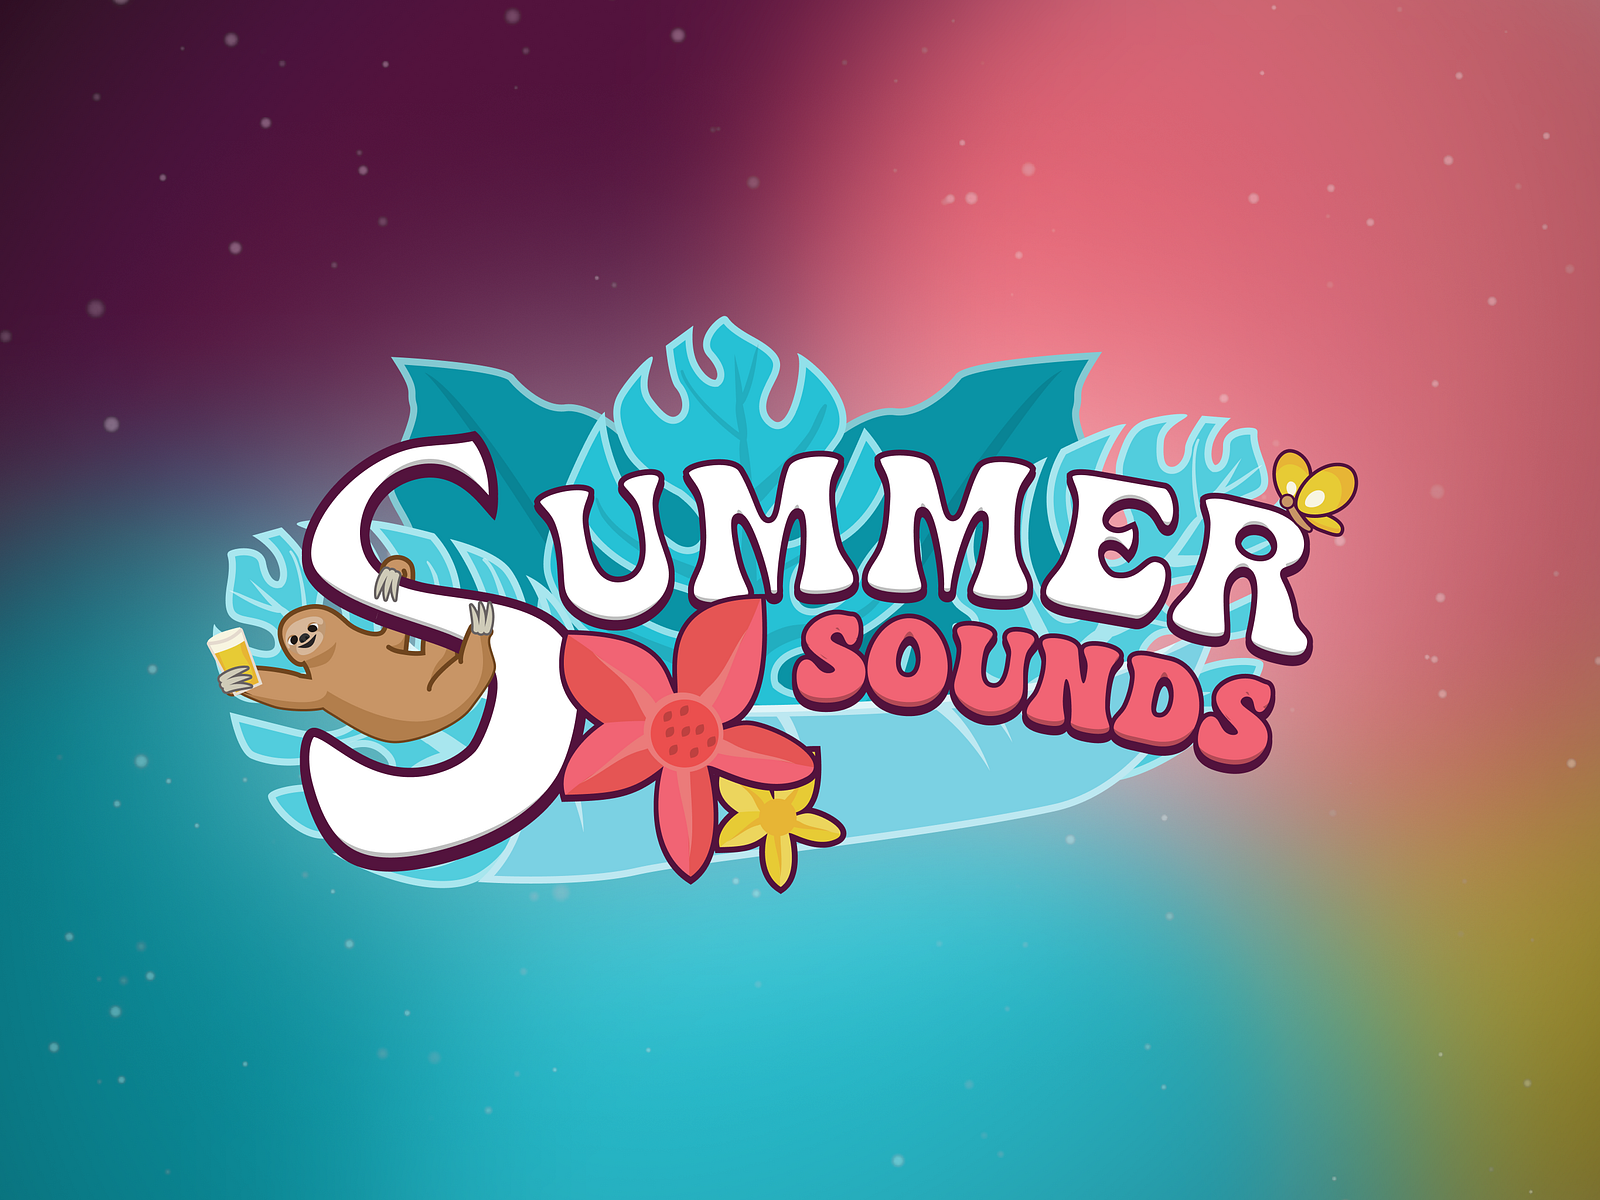 Summer Sounds Logo by Matthias Wentink on Dribbble